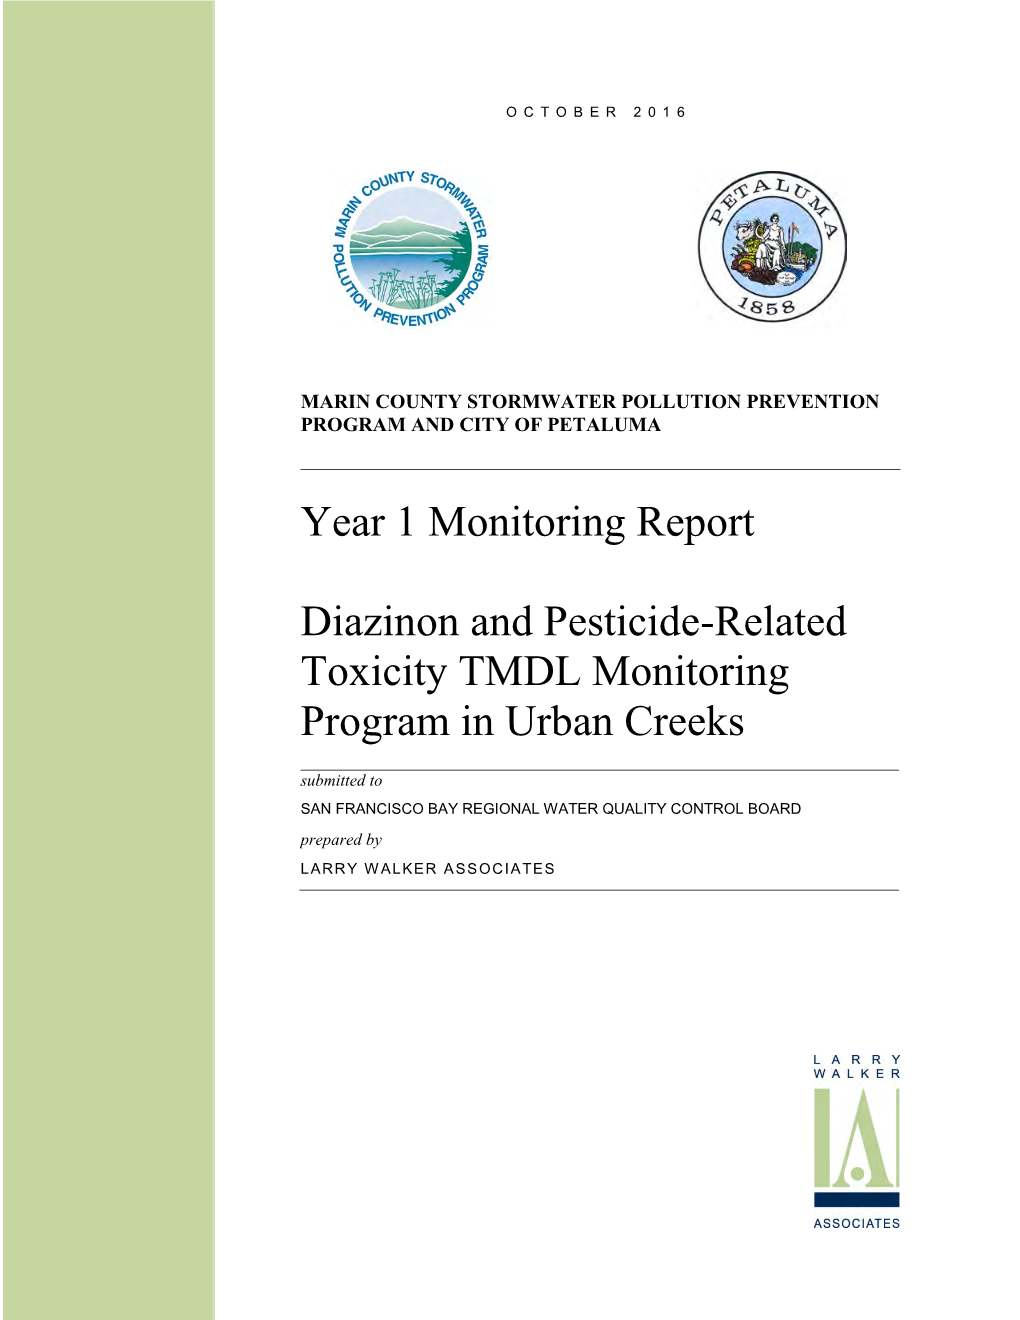 Year 1 Monitoring Report Diazinon and Pesticide-Related Toxicity